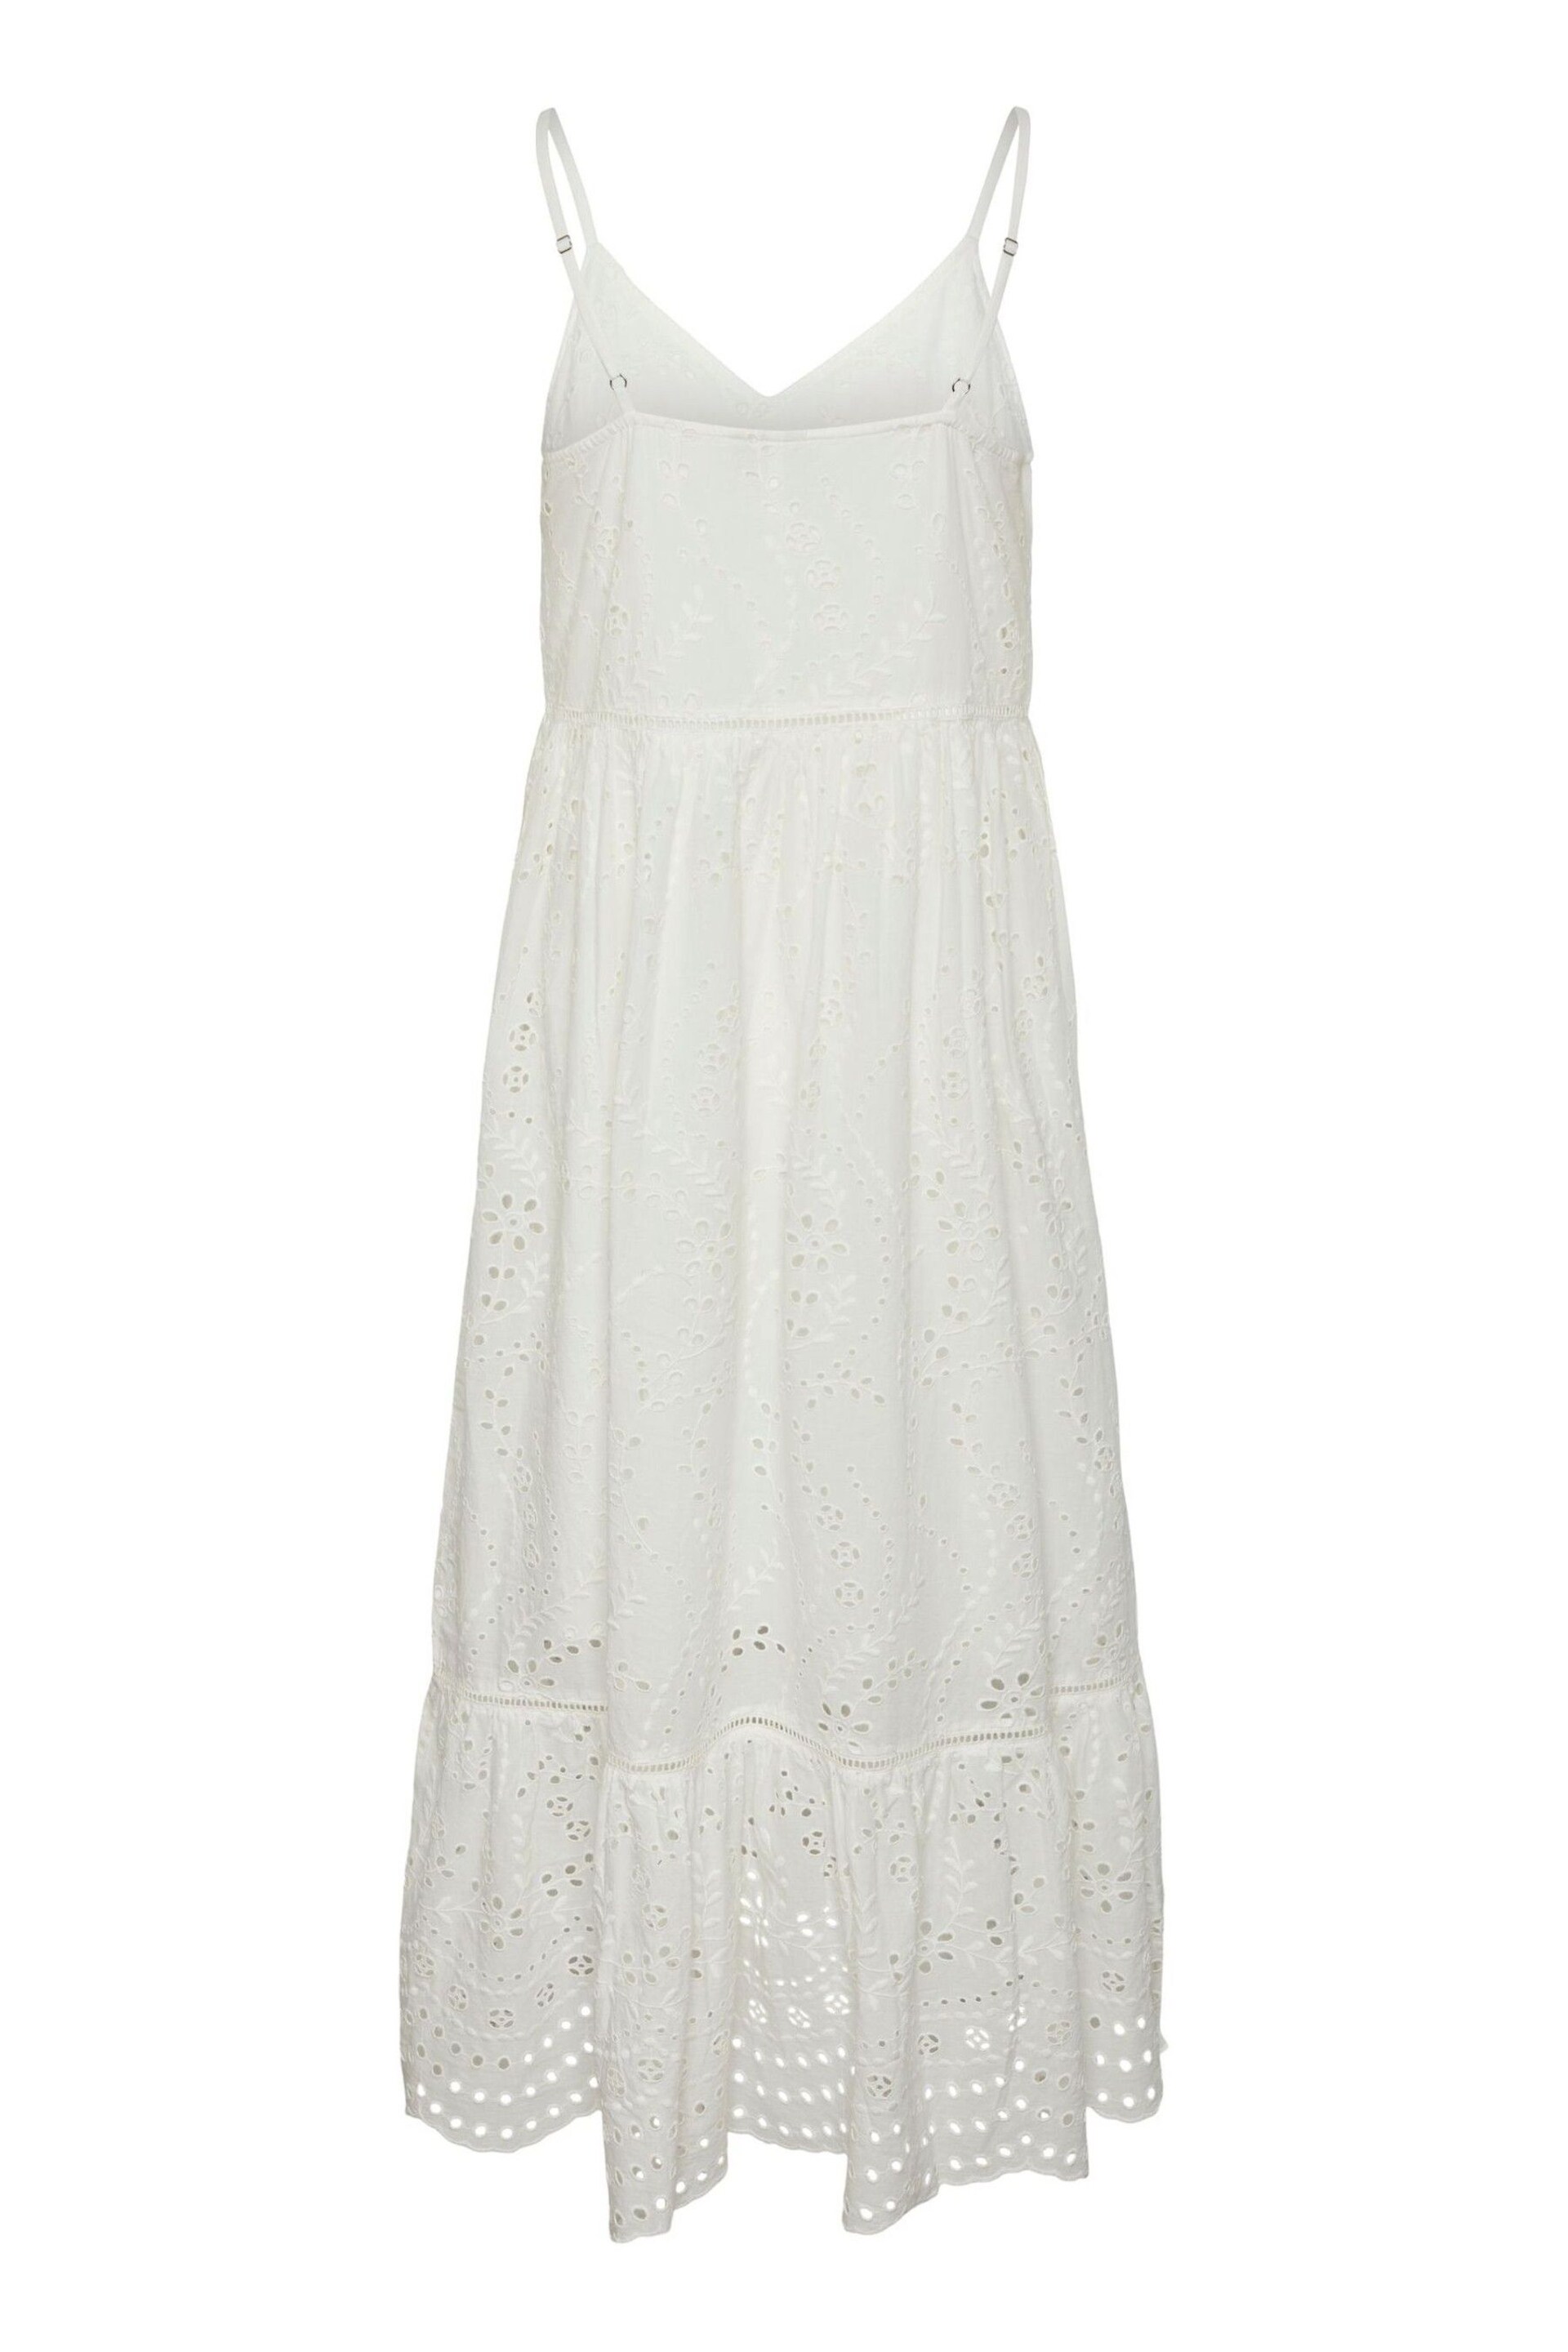 Y.A.S White Broderie Maxi Sun Dress - Image 5 of 5